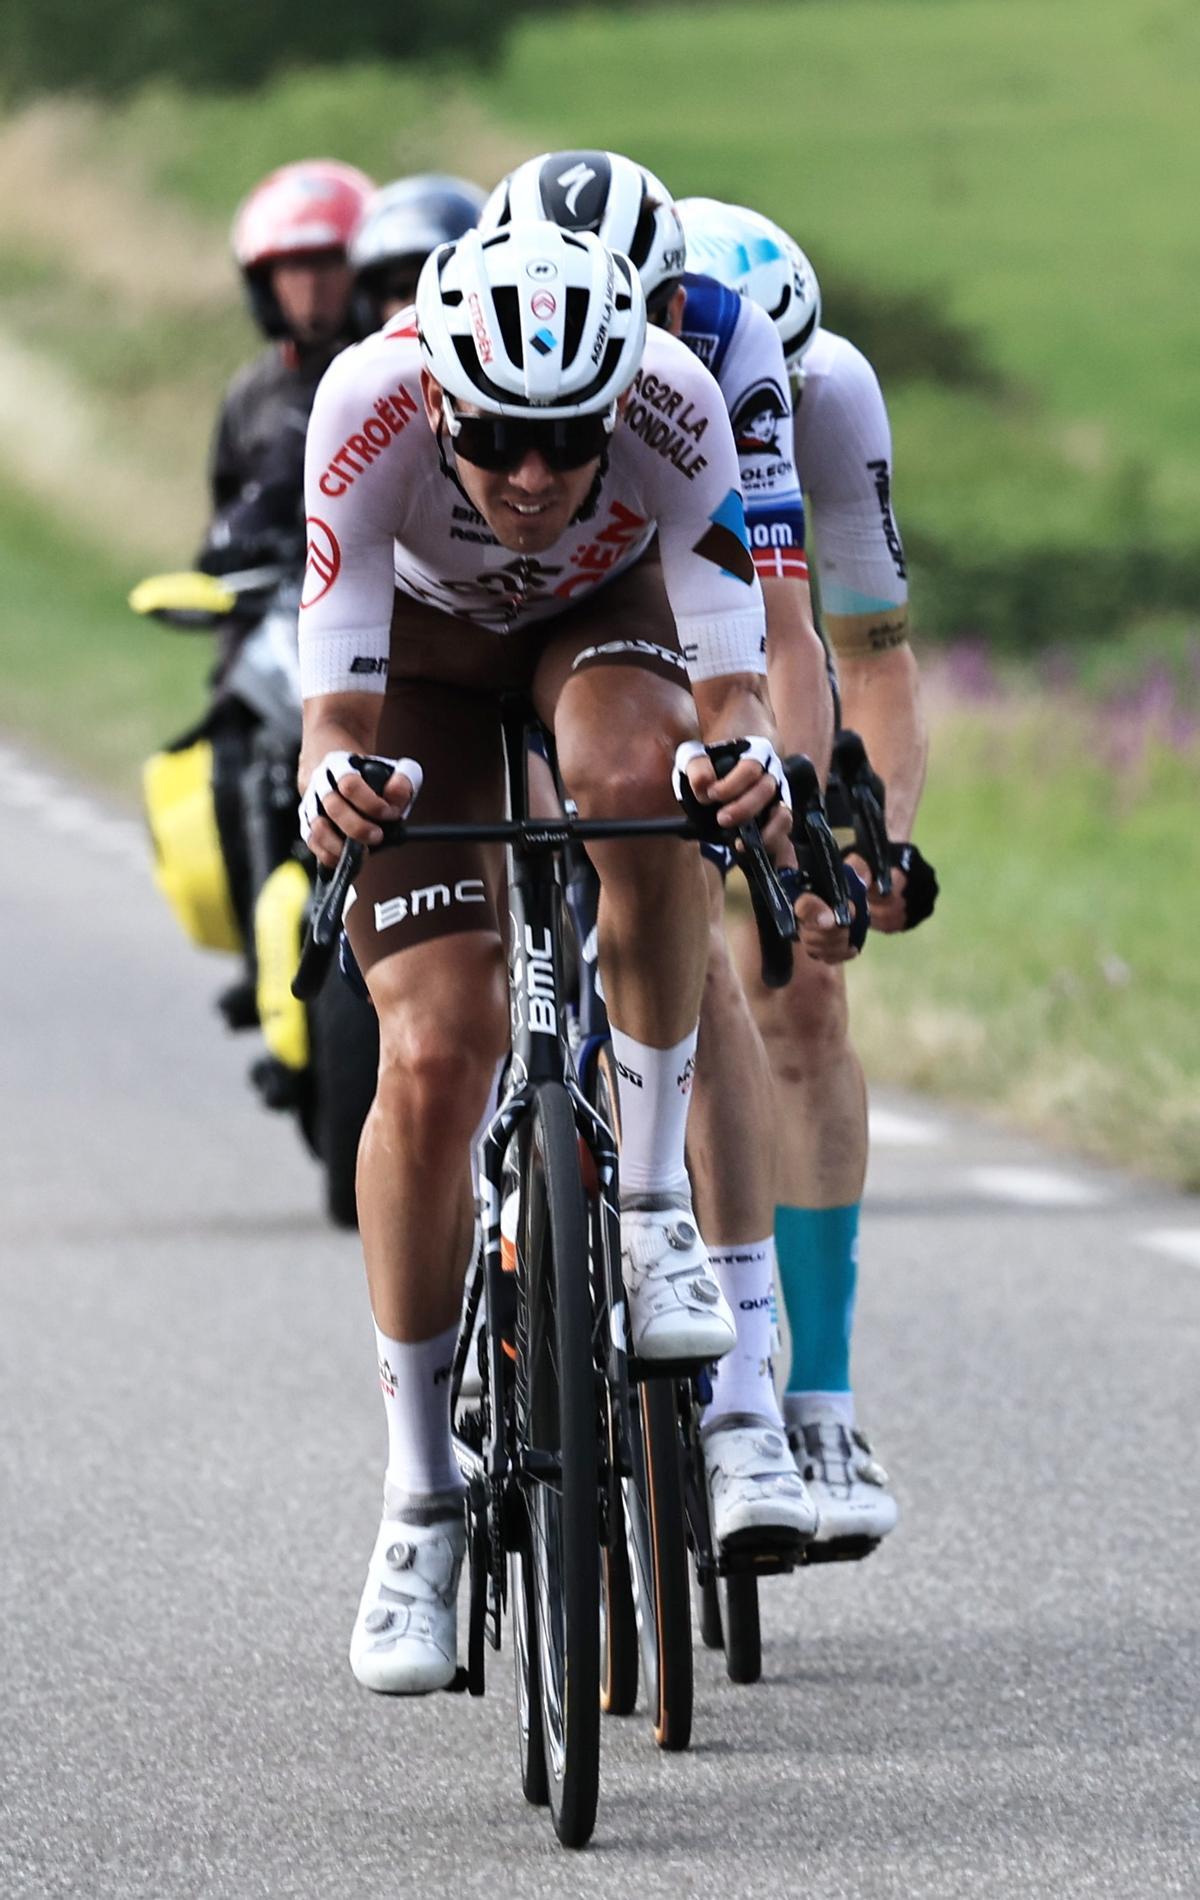 Poligny (France), 21/07/2023.- Australian rider Ben O’Connor of AG2R Citroen Team in action during the 19th stage of the Tour de France 2023, a 173kms race from Moirans-en-Montagne to Poligny, France, 21 July 2023. (Ciclismo, Francia) EFE/EPA/CHRISTOPHE PETIT TESSON